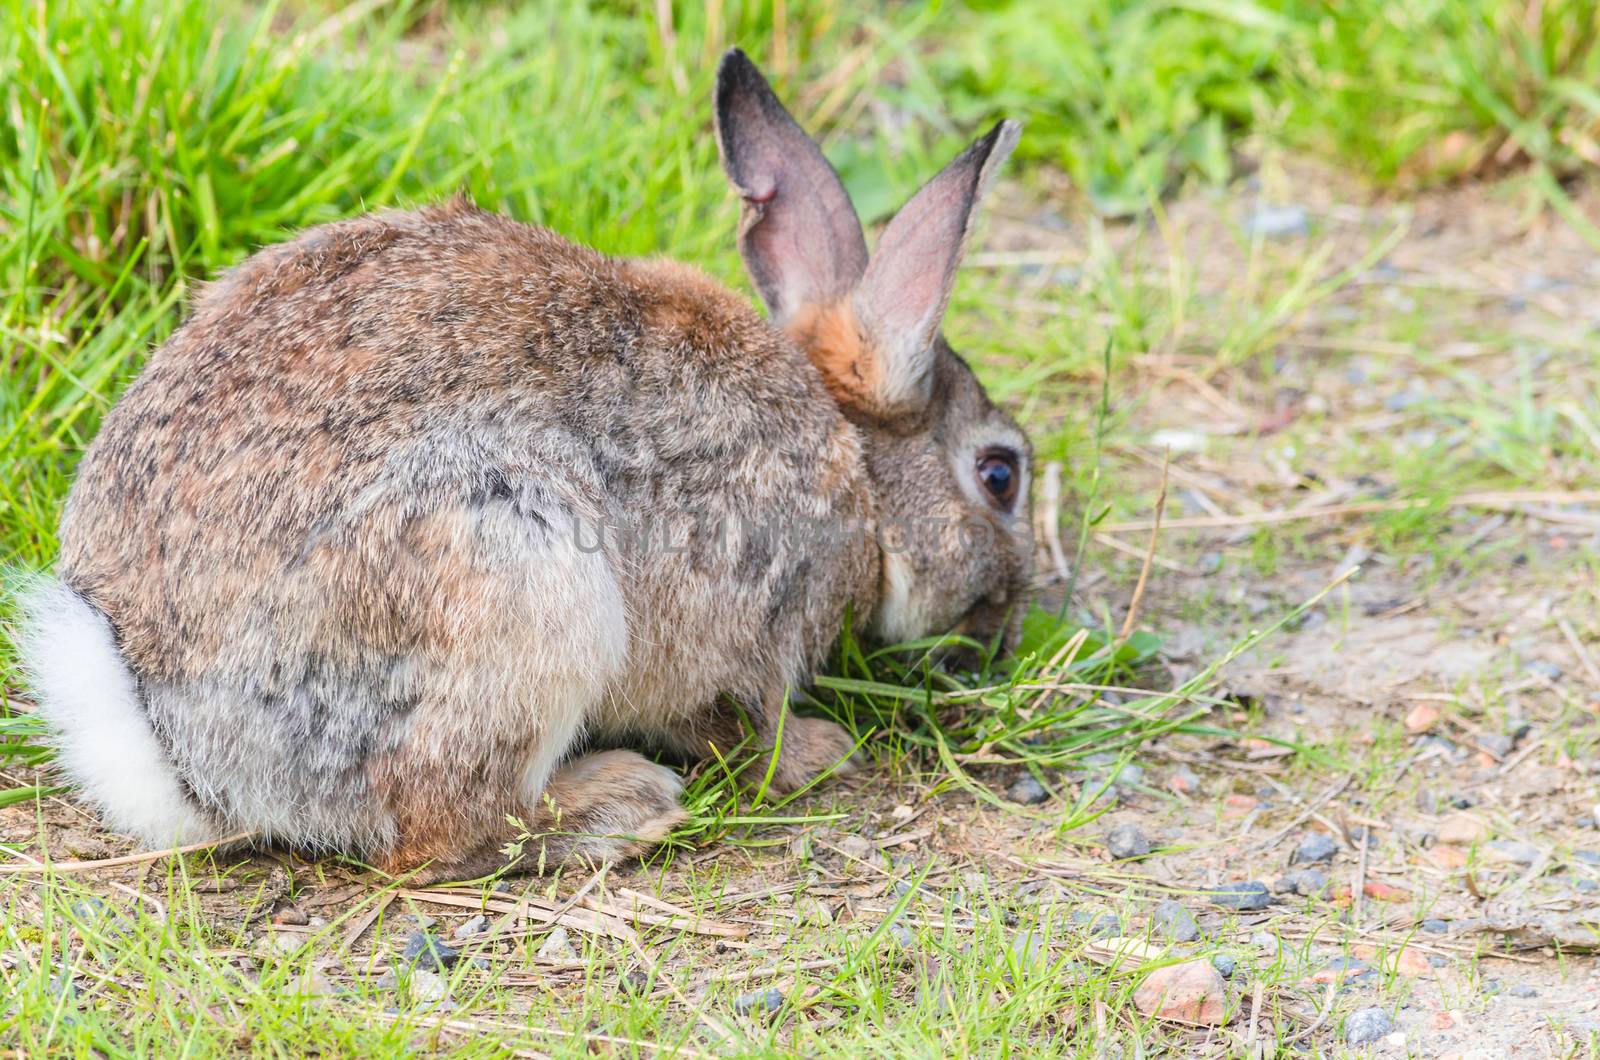 Wild rabbit photographed from the side sitting relaxed in the grass and eats.